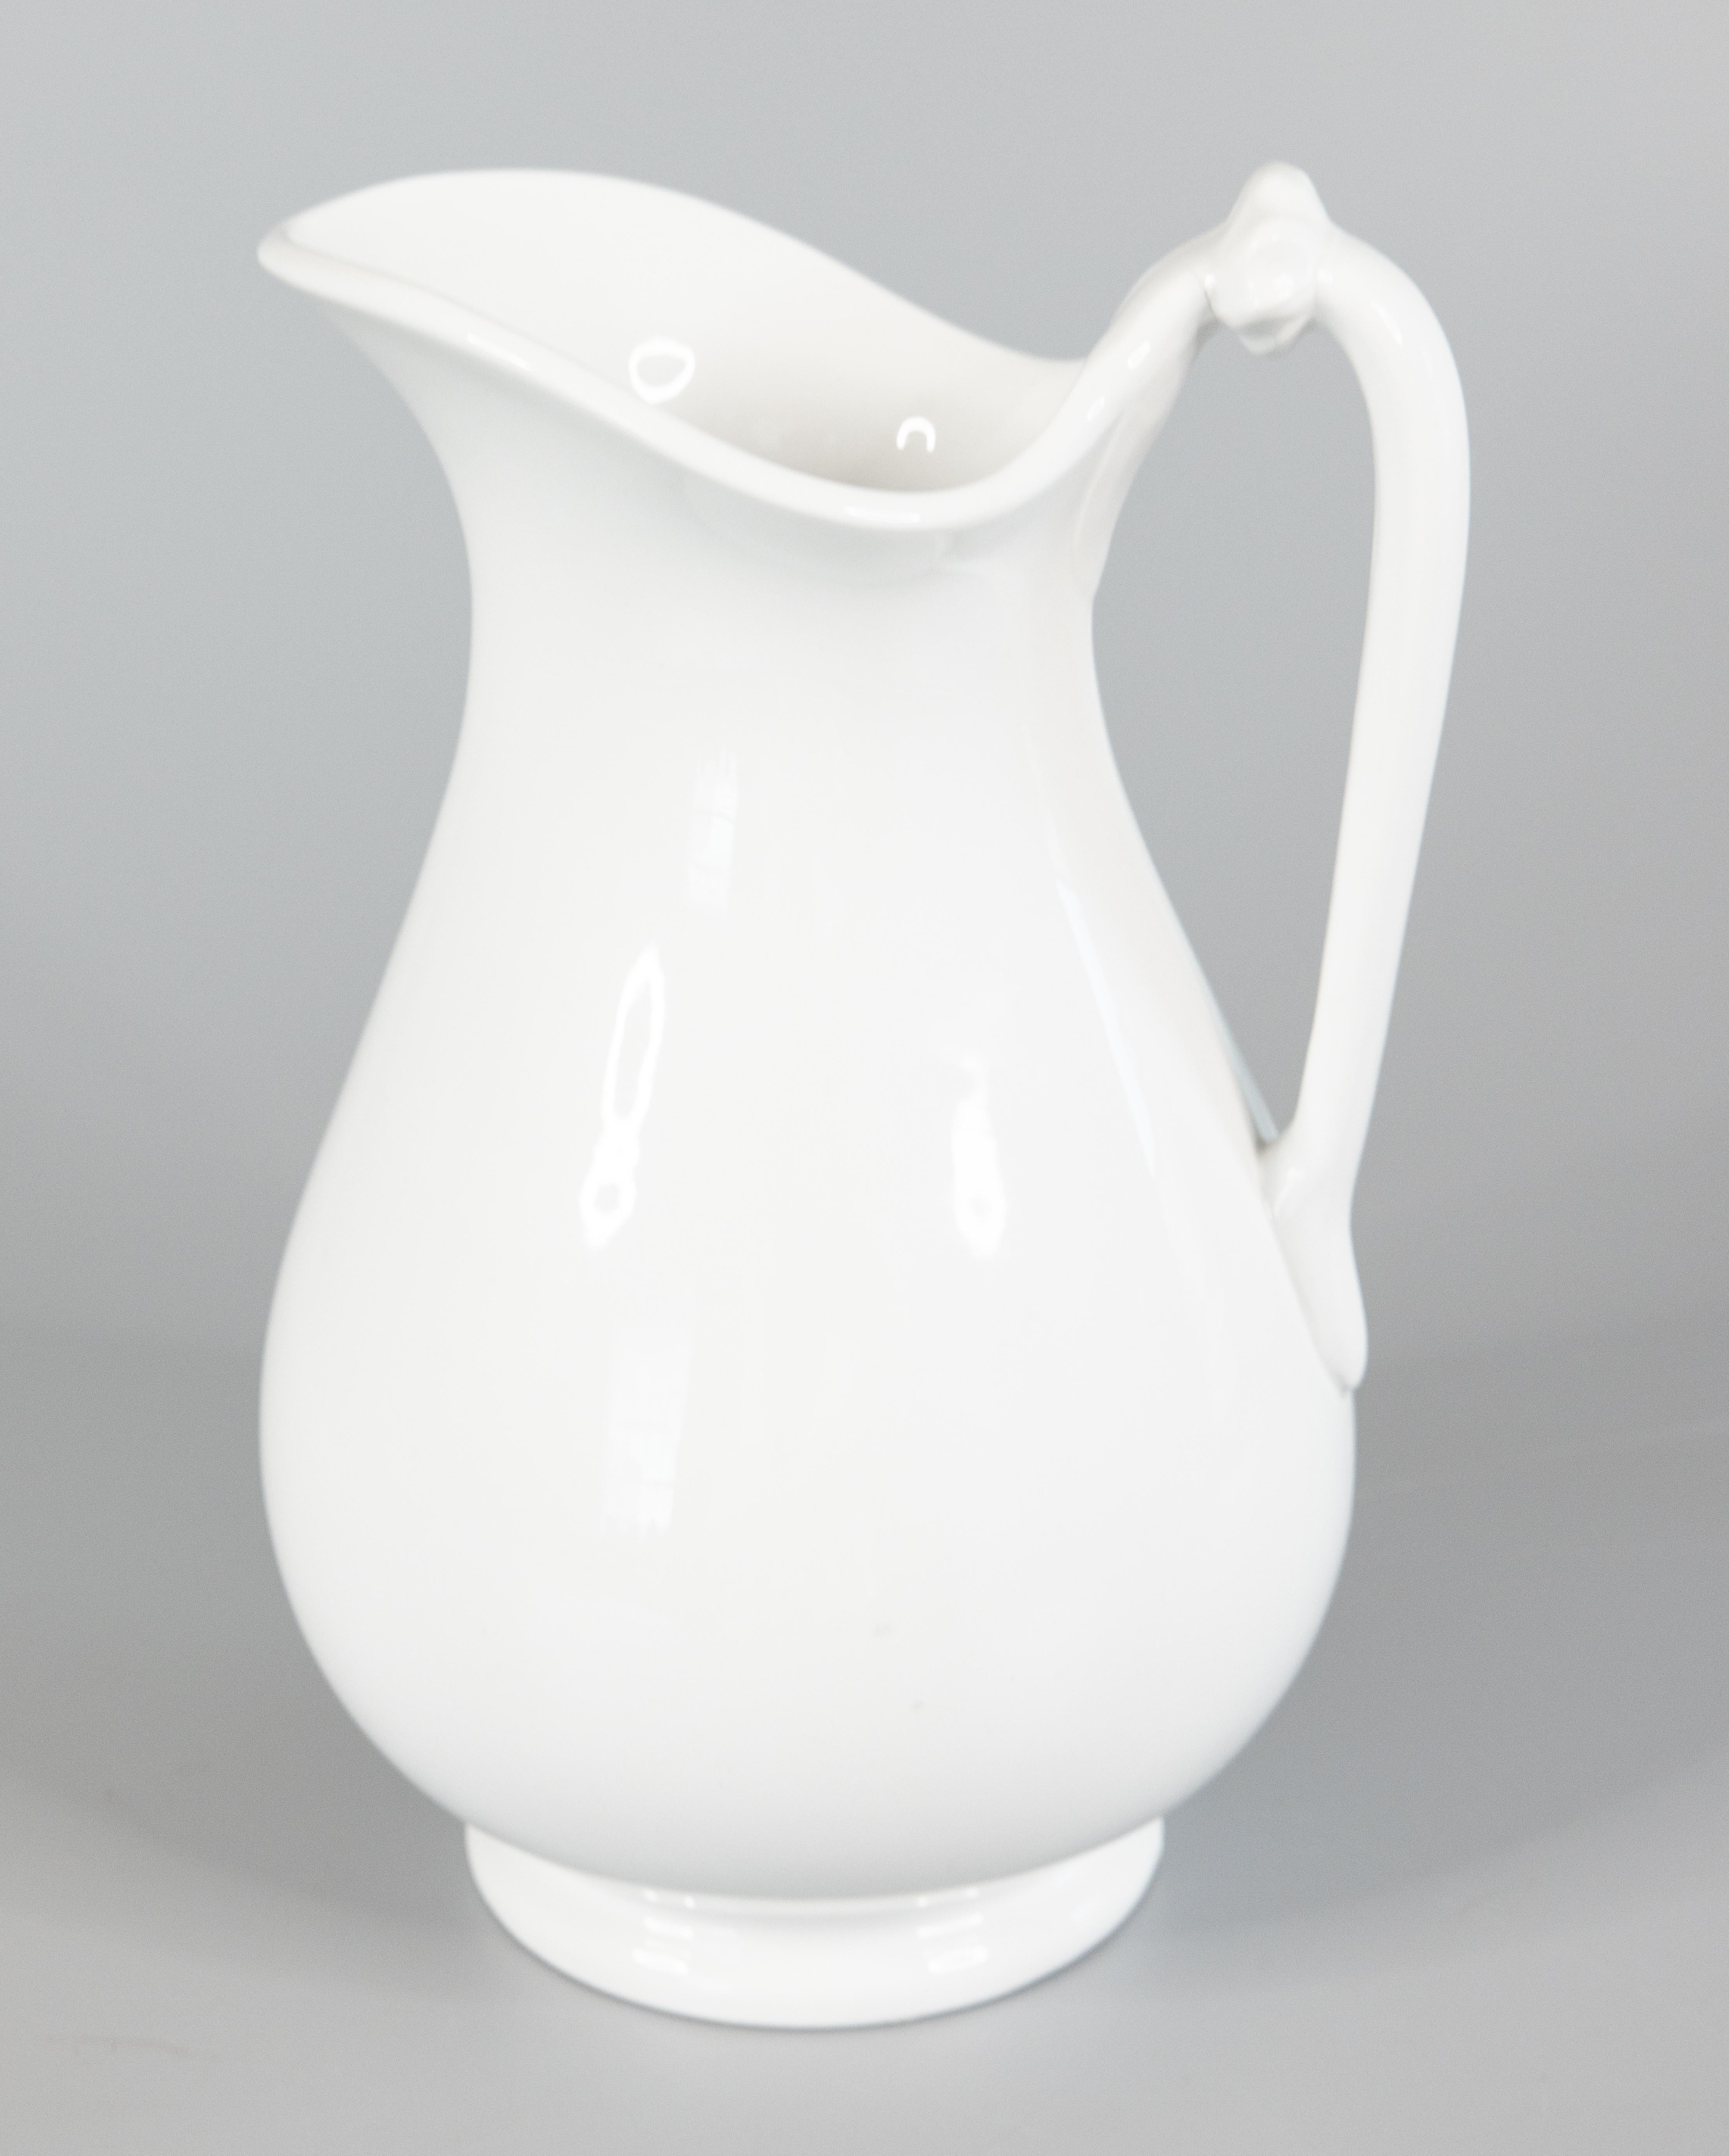 A lovely antique English white ironstone pitcher by T. & R. Boote, circa 1870. Maker's mark on the bottom with raised registration diamond. It's a nice large size measuring 12 inches tall. This classic and timeless pitcher has a wonderful simple